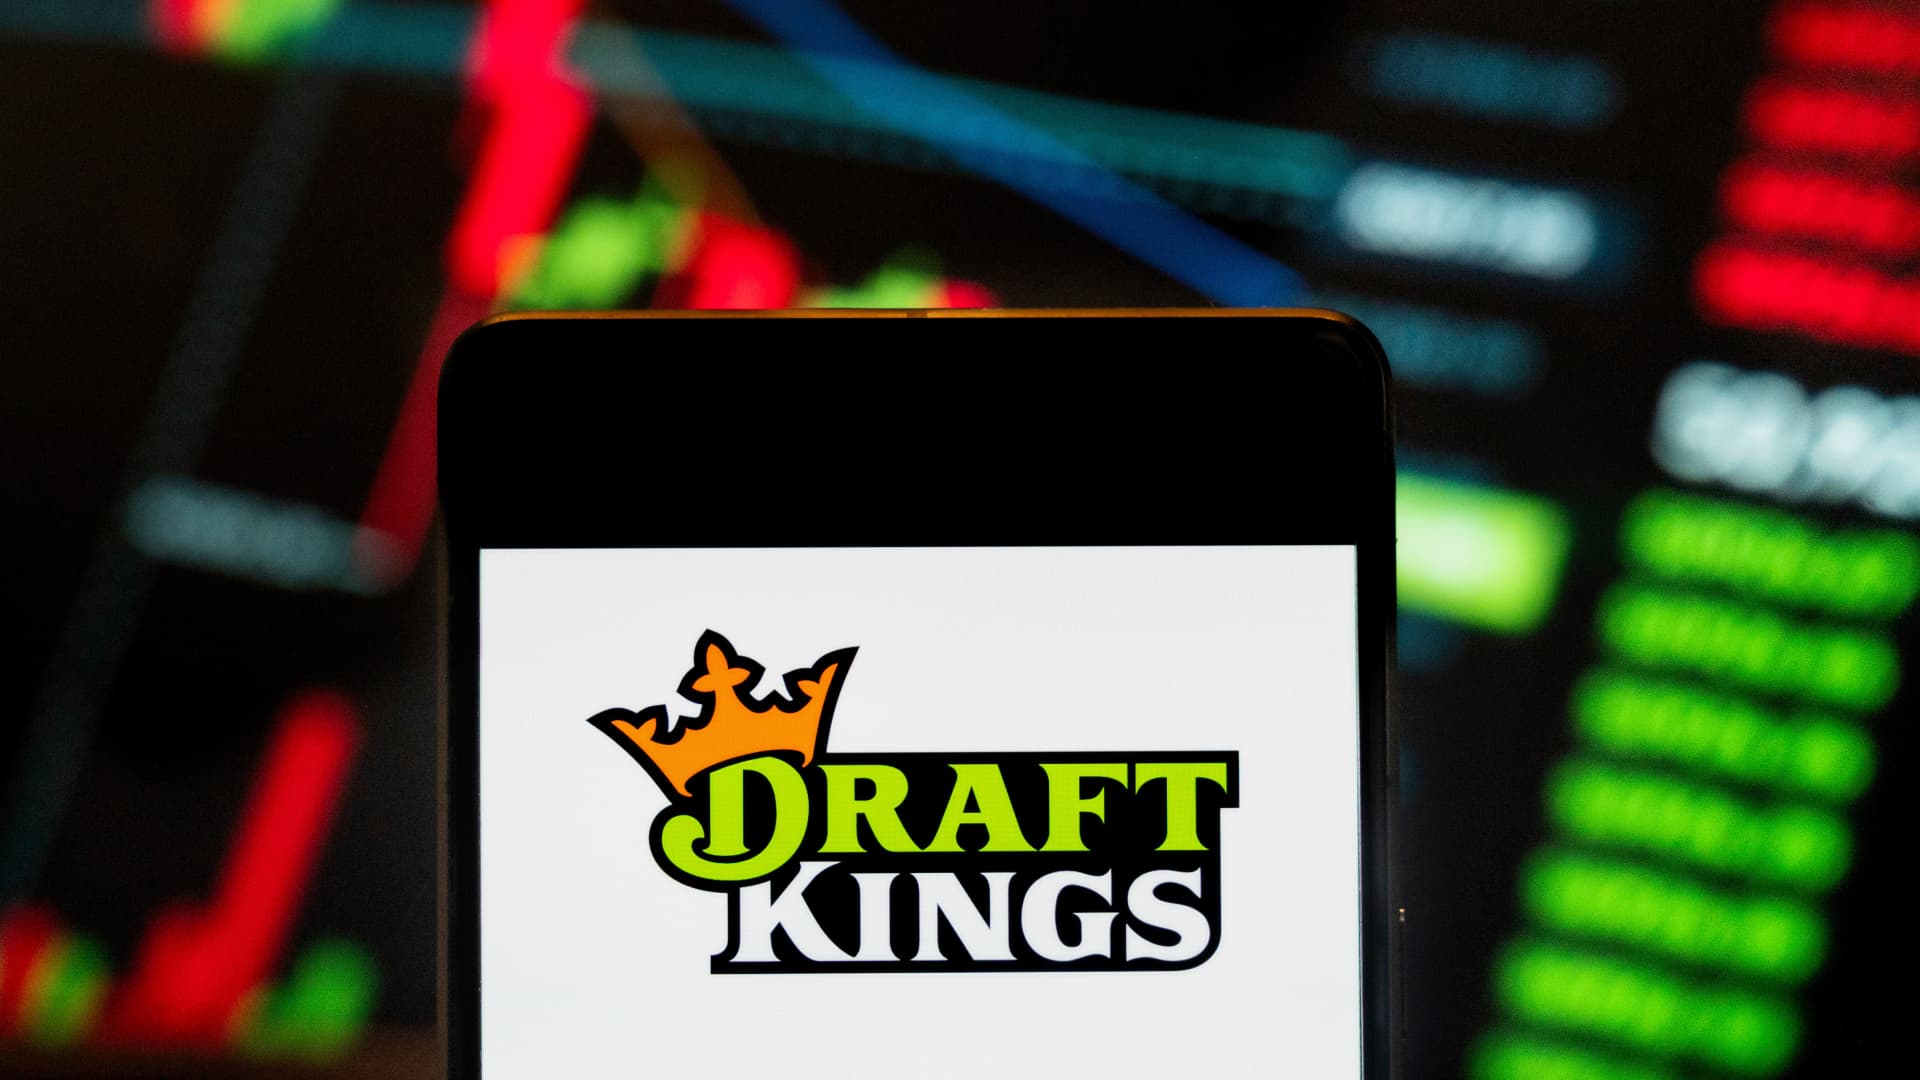 DraftKings to tax winning bets in some states in a bid to boost profit